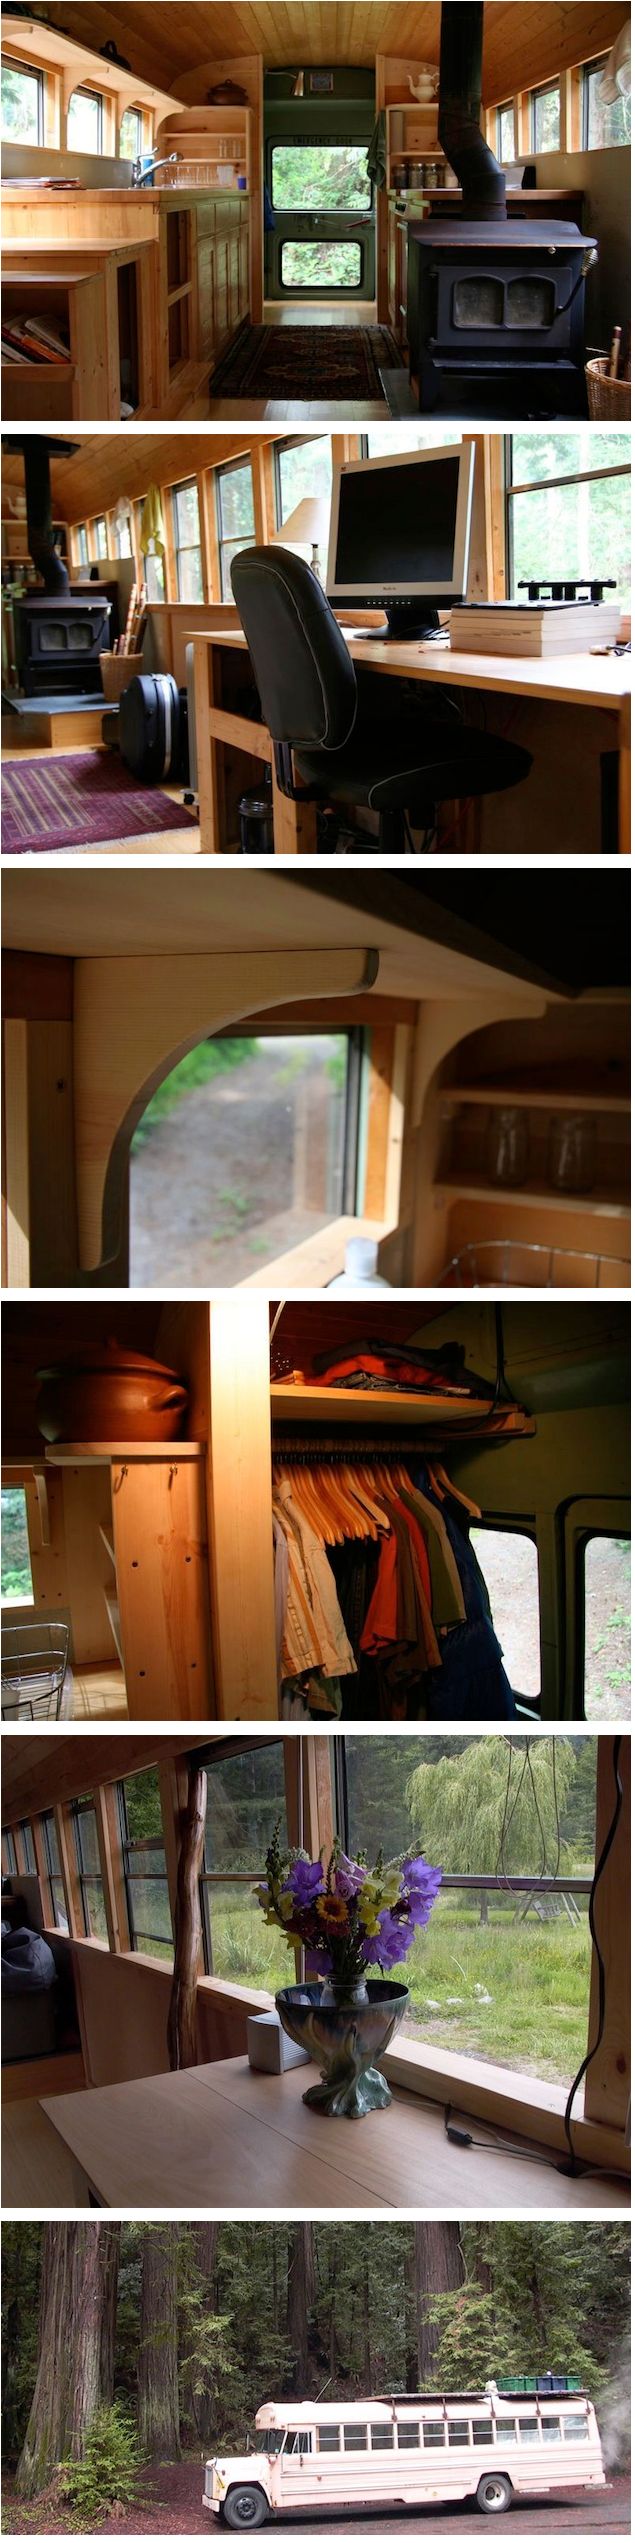 school-bus-gives-mobile-home-a-new-meaning-1